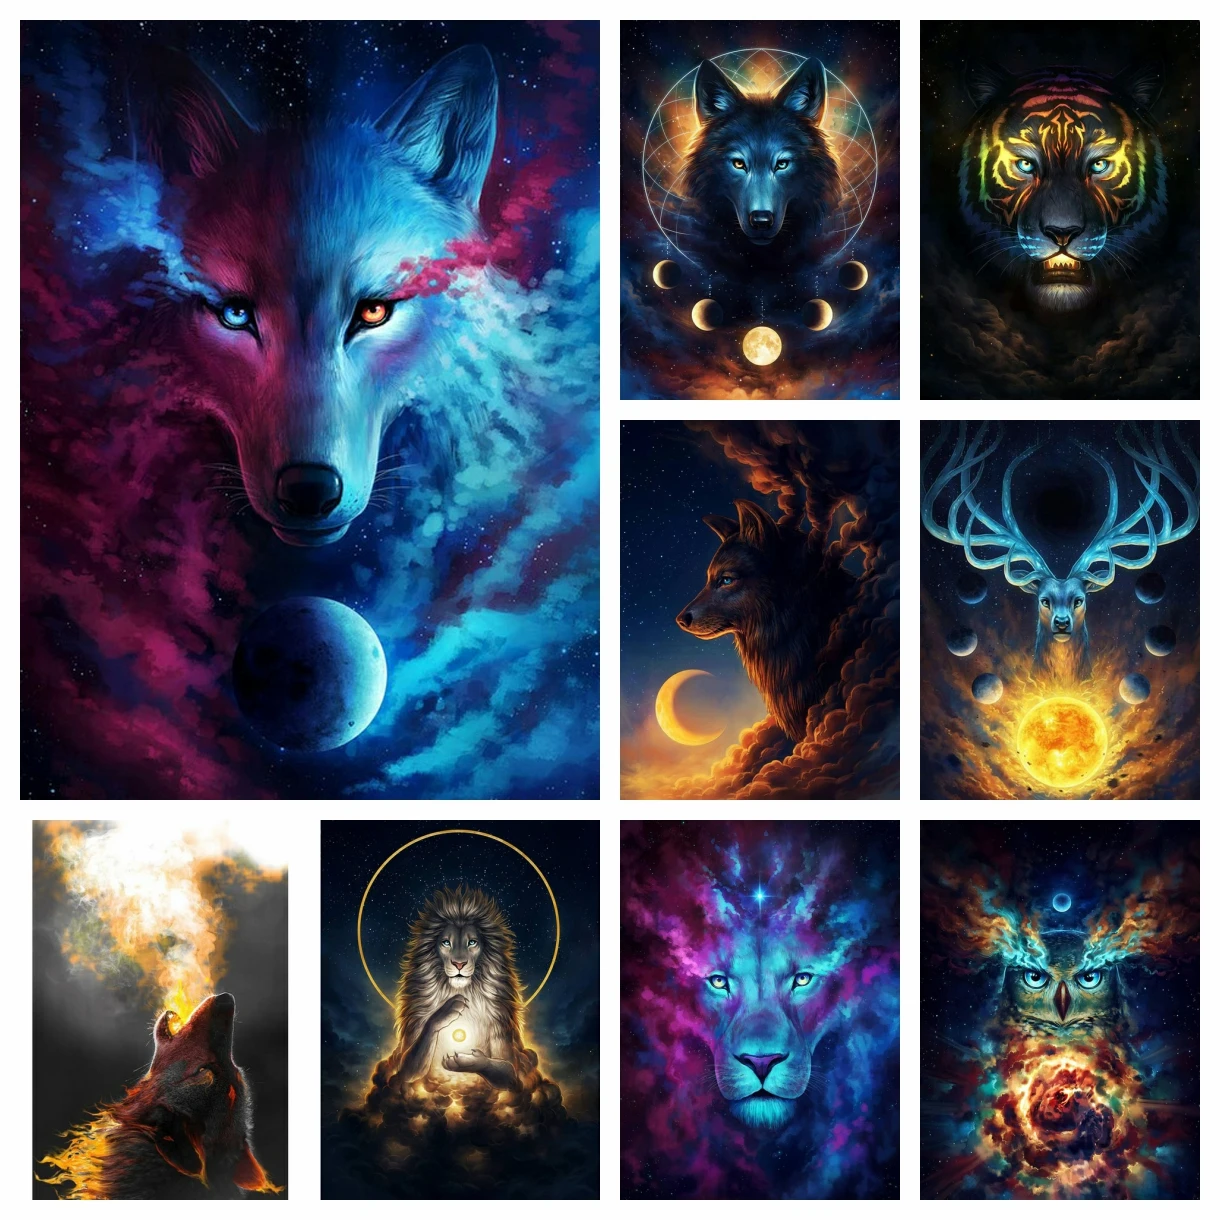 

DIY 5D Diamond Painting Fantasy Animals Wolf Lion Tiger Cross Stitch Kit Full Drill Square Embroidery Mosaic Art Picture Decor